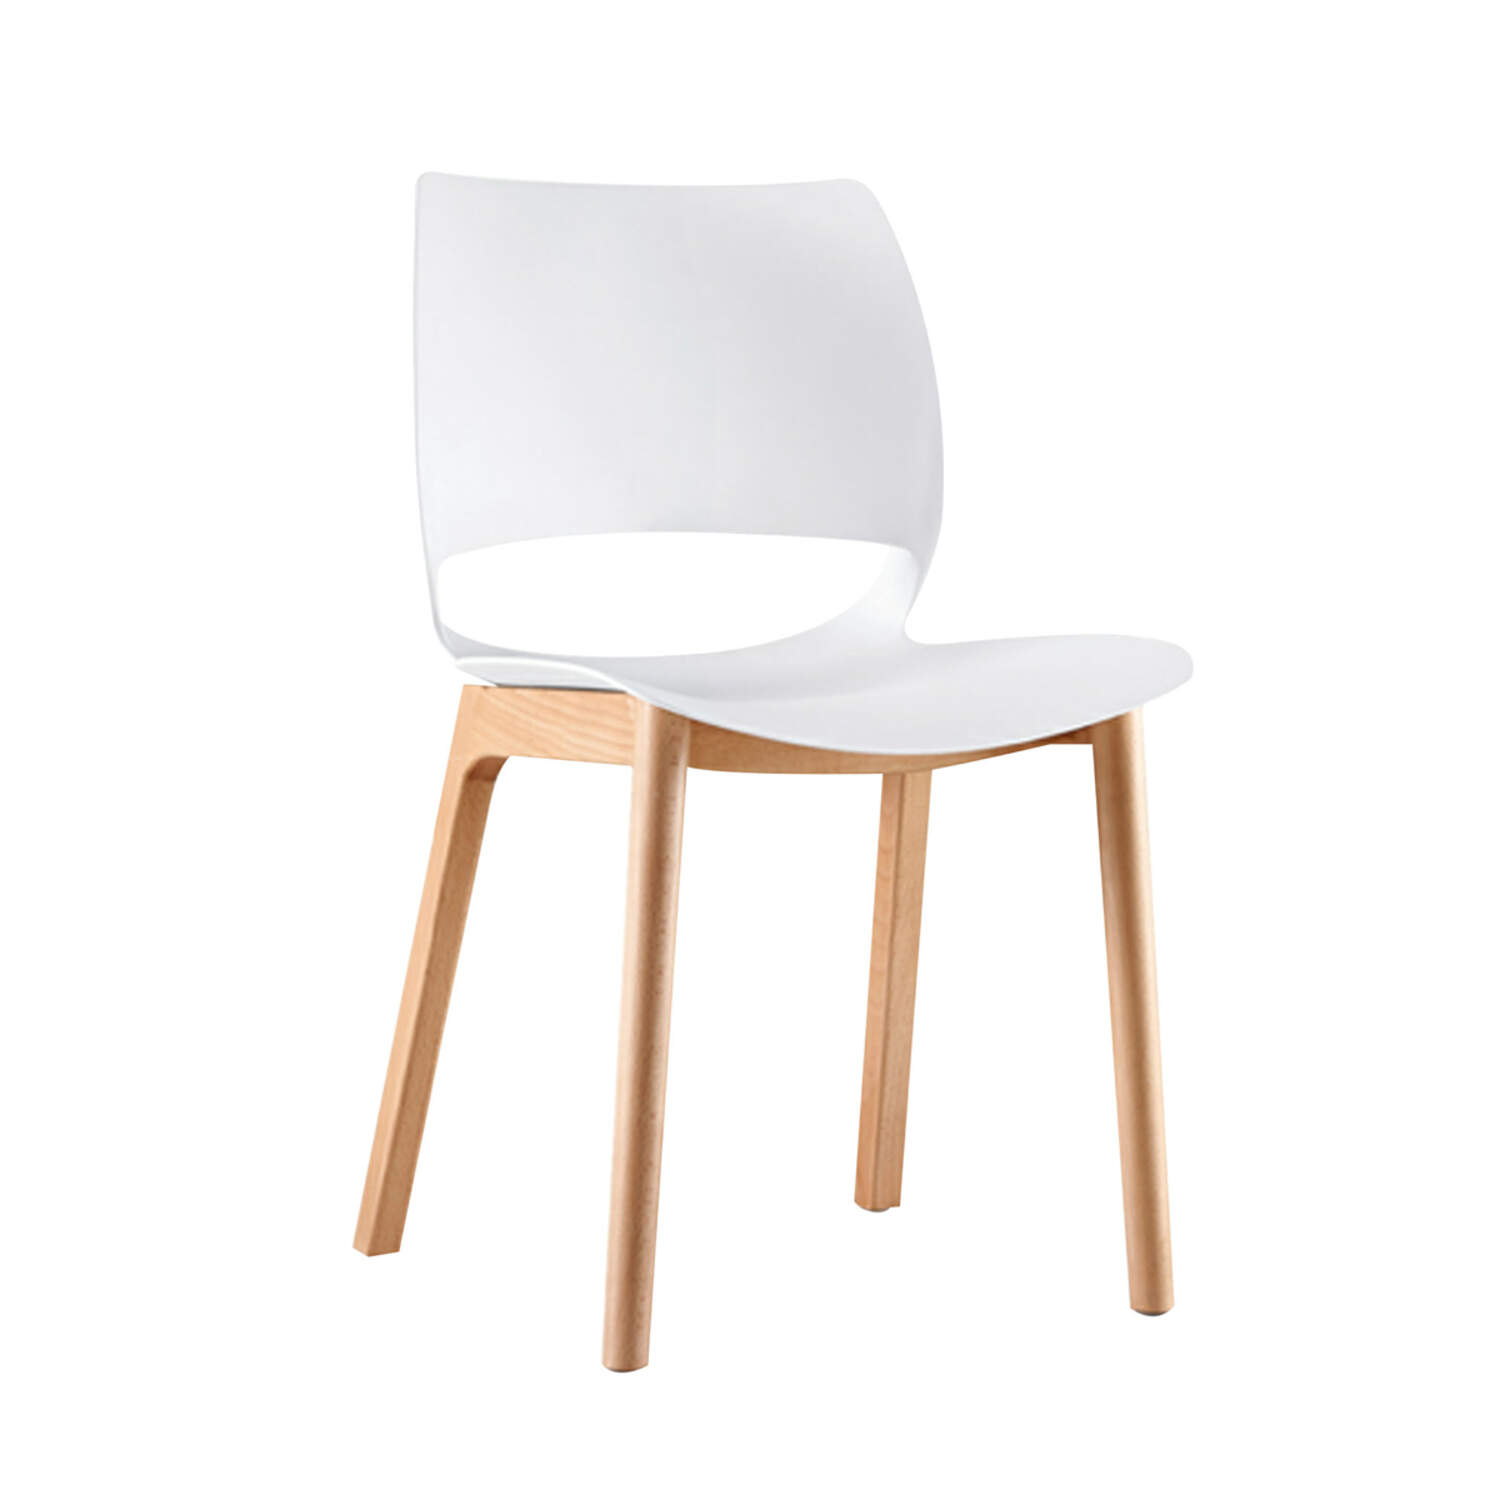 Vogue Visitors Chair White Wooden Legs